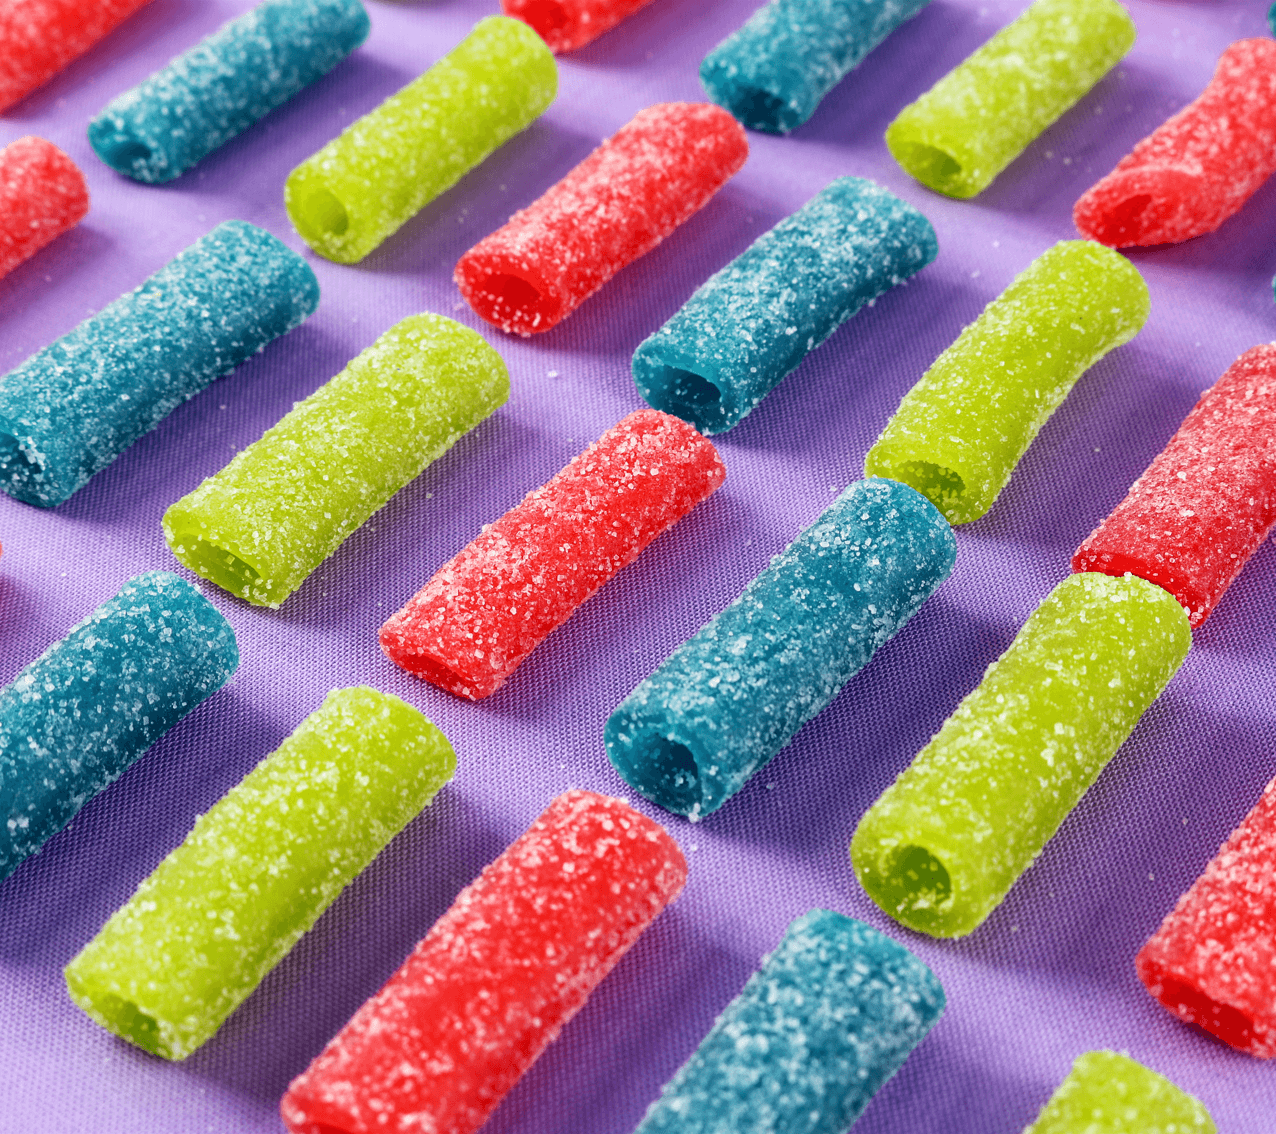 Sugar coated sour candy bites with blue raspberry, strawberry, and green apple flavors